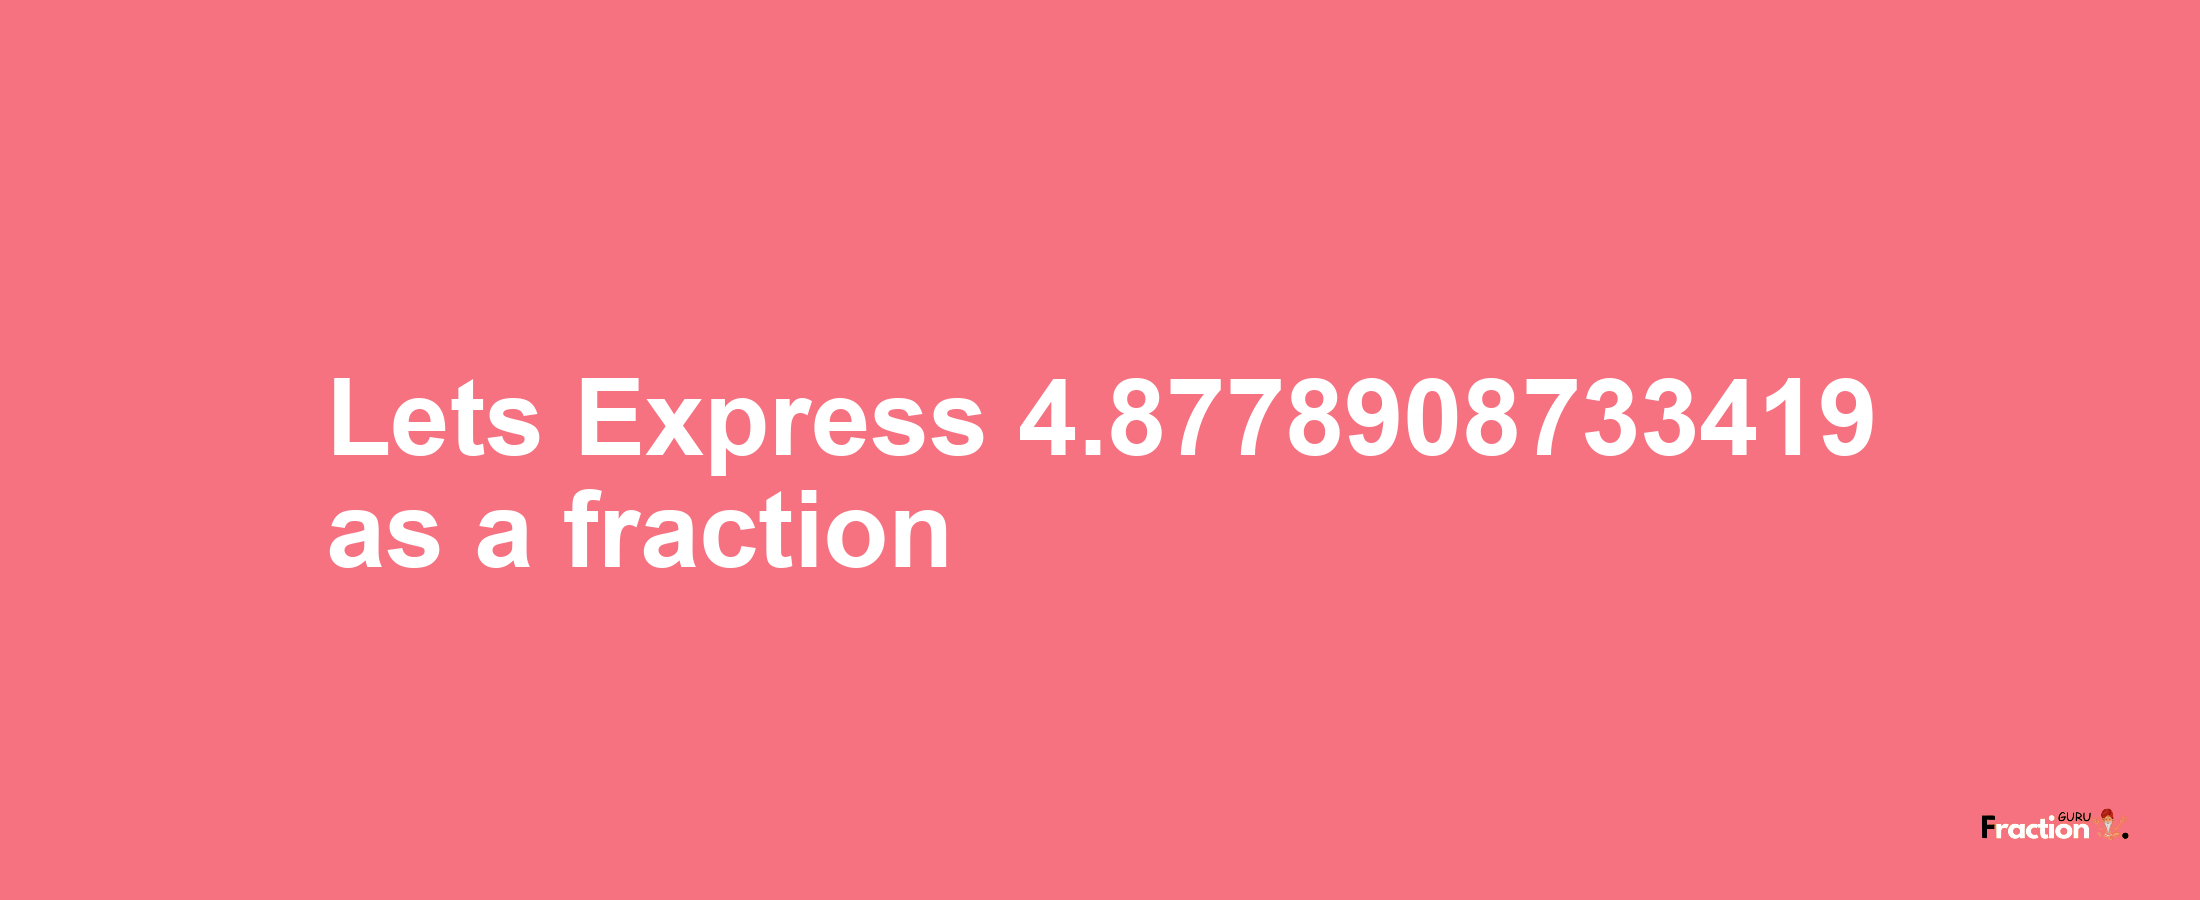 Lets Express 4.8778908733419 as afraction